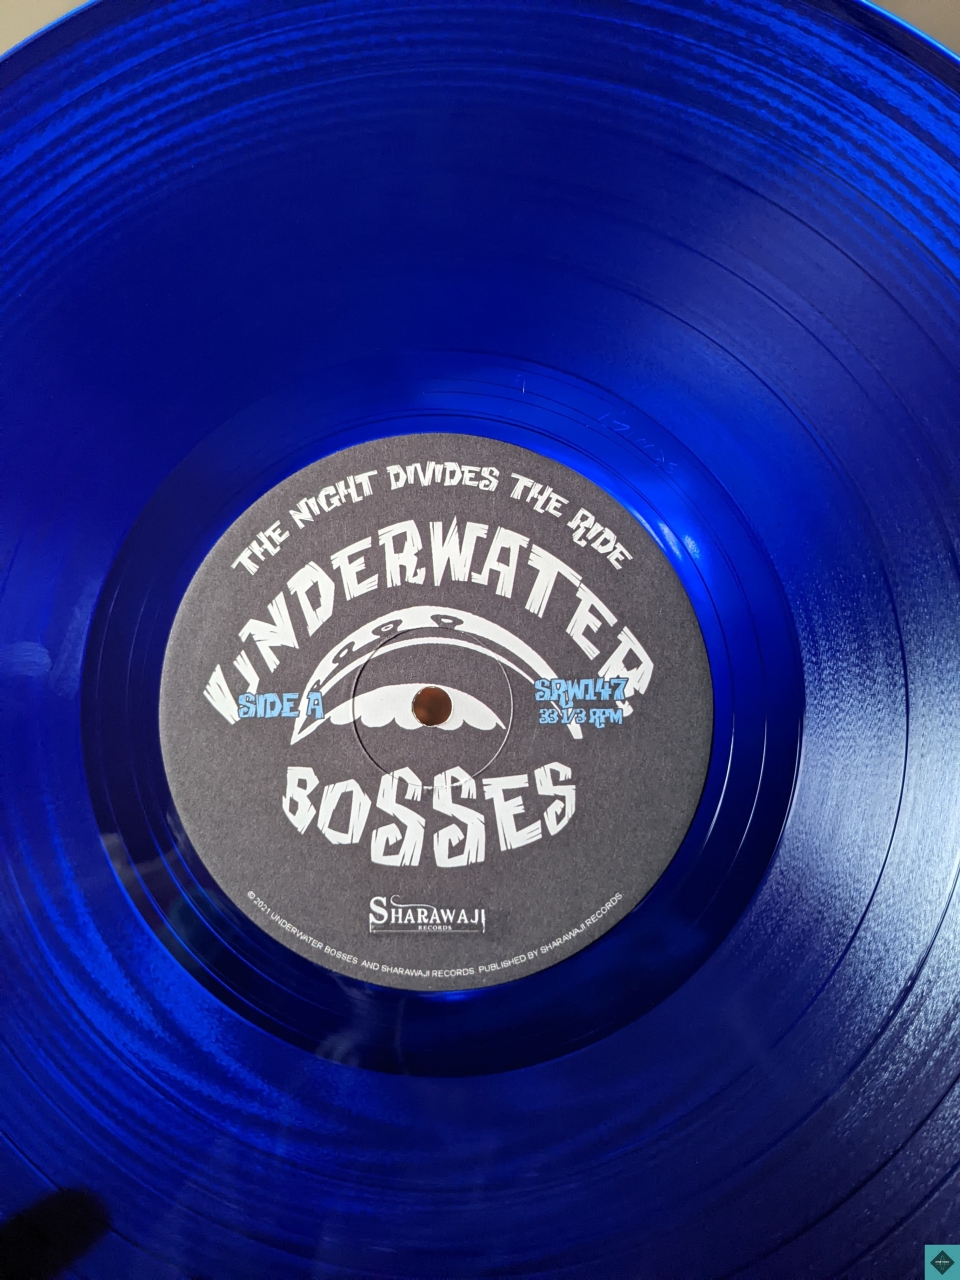 NOW SHIPPING FROM THE USA: The Night Divides the Ride is the second full length album by Underwater Bosses. Recorded in 2020/21 in Syracuse, NY, featuring 12 tracks of high energy instrumental surf. Join the Bosses as they take you along on their journey of the never ending ride. Vinyl, CD and digital download available now. Add it to your collection today - https://underwaterbosses.bandcamp.com/album/the-night-divides-the-ride#underwaterbosses  #sharawajirecords #independentrecordlabel #vinyl #surfvinyl #surfmusic #horrorsurf #instrumental #monstromental #surfrock #syracuse #fender #fenderstratocaster #stratocaster  #surf #instro #reverb #twang